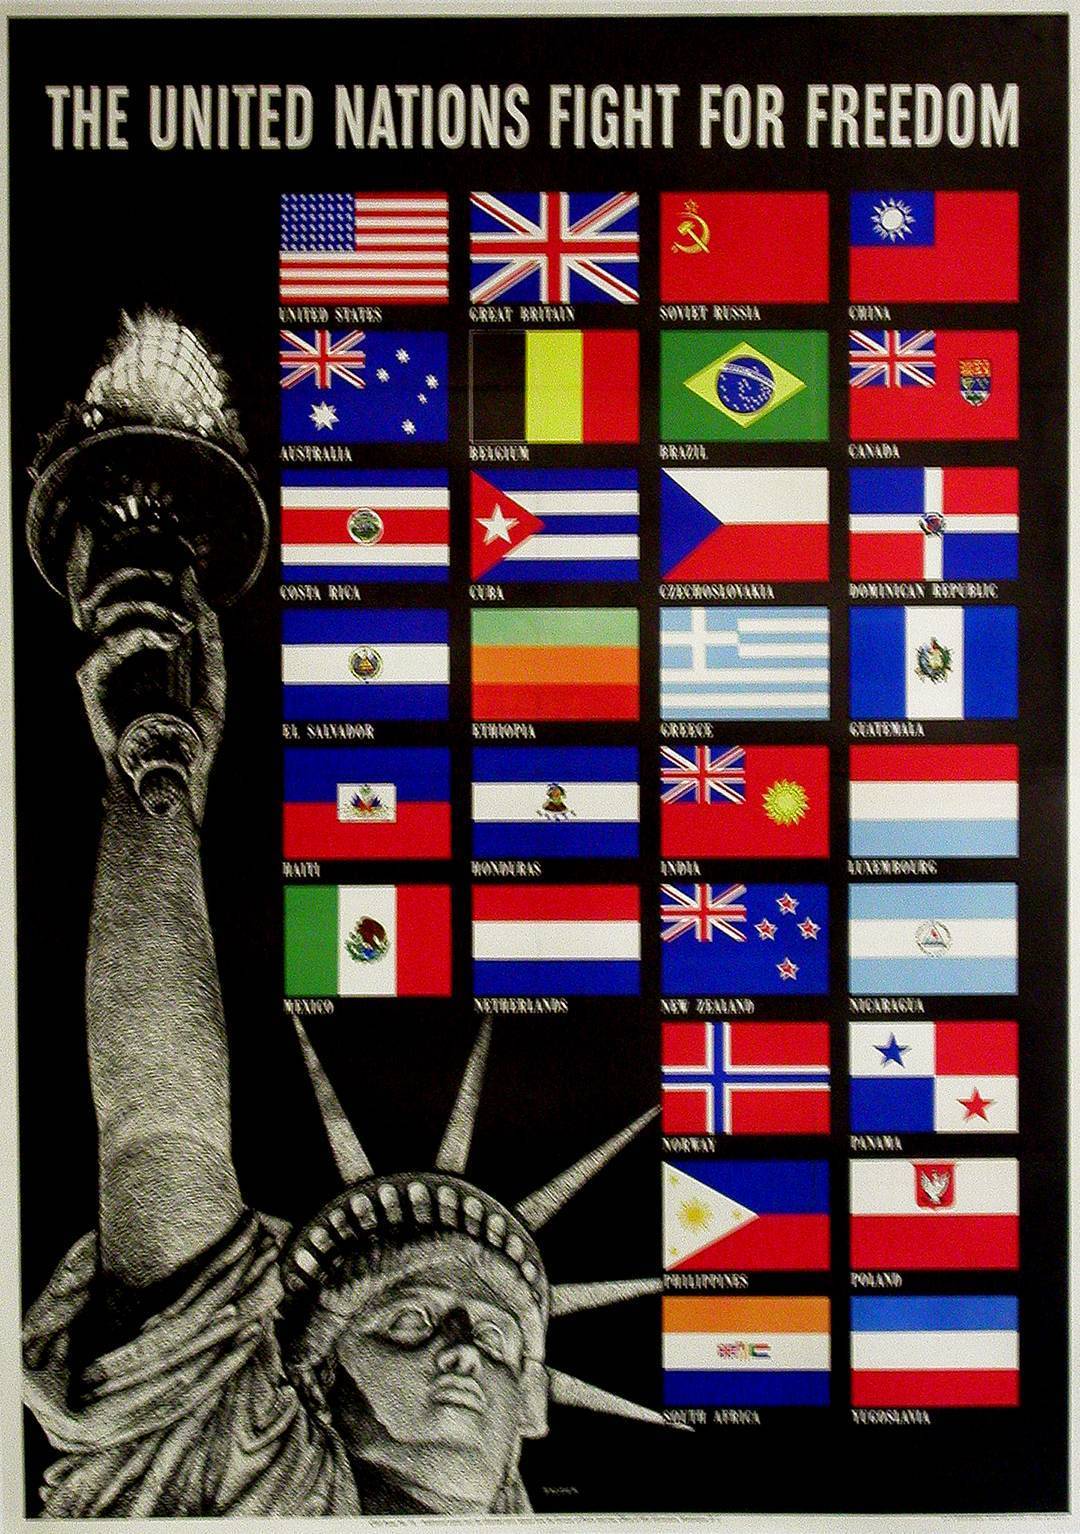 Original American WWll Poster - The United Nations Fight for Freedom by Broder 1942